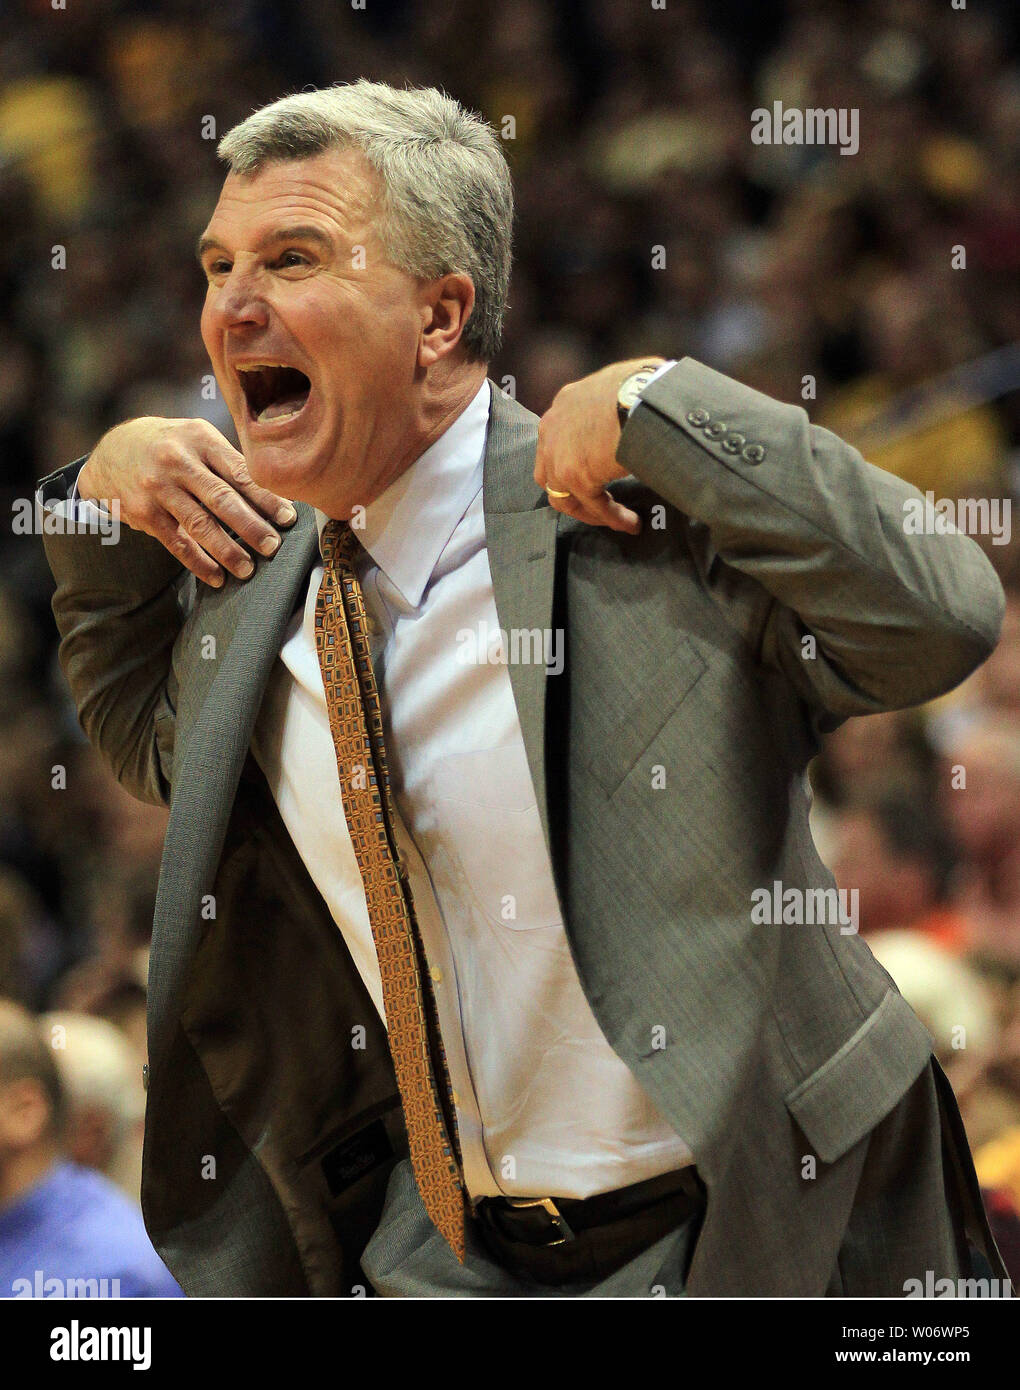 Illinois' head basketball coach Bruce Weber tries to call a time out in the first half of the annual 'Braggin' Rights game against Missouri at the Scottrade Center in St. Louis on December 22, 2010.   UPI/Bill Greenblatt Stock Photo